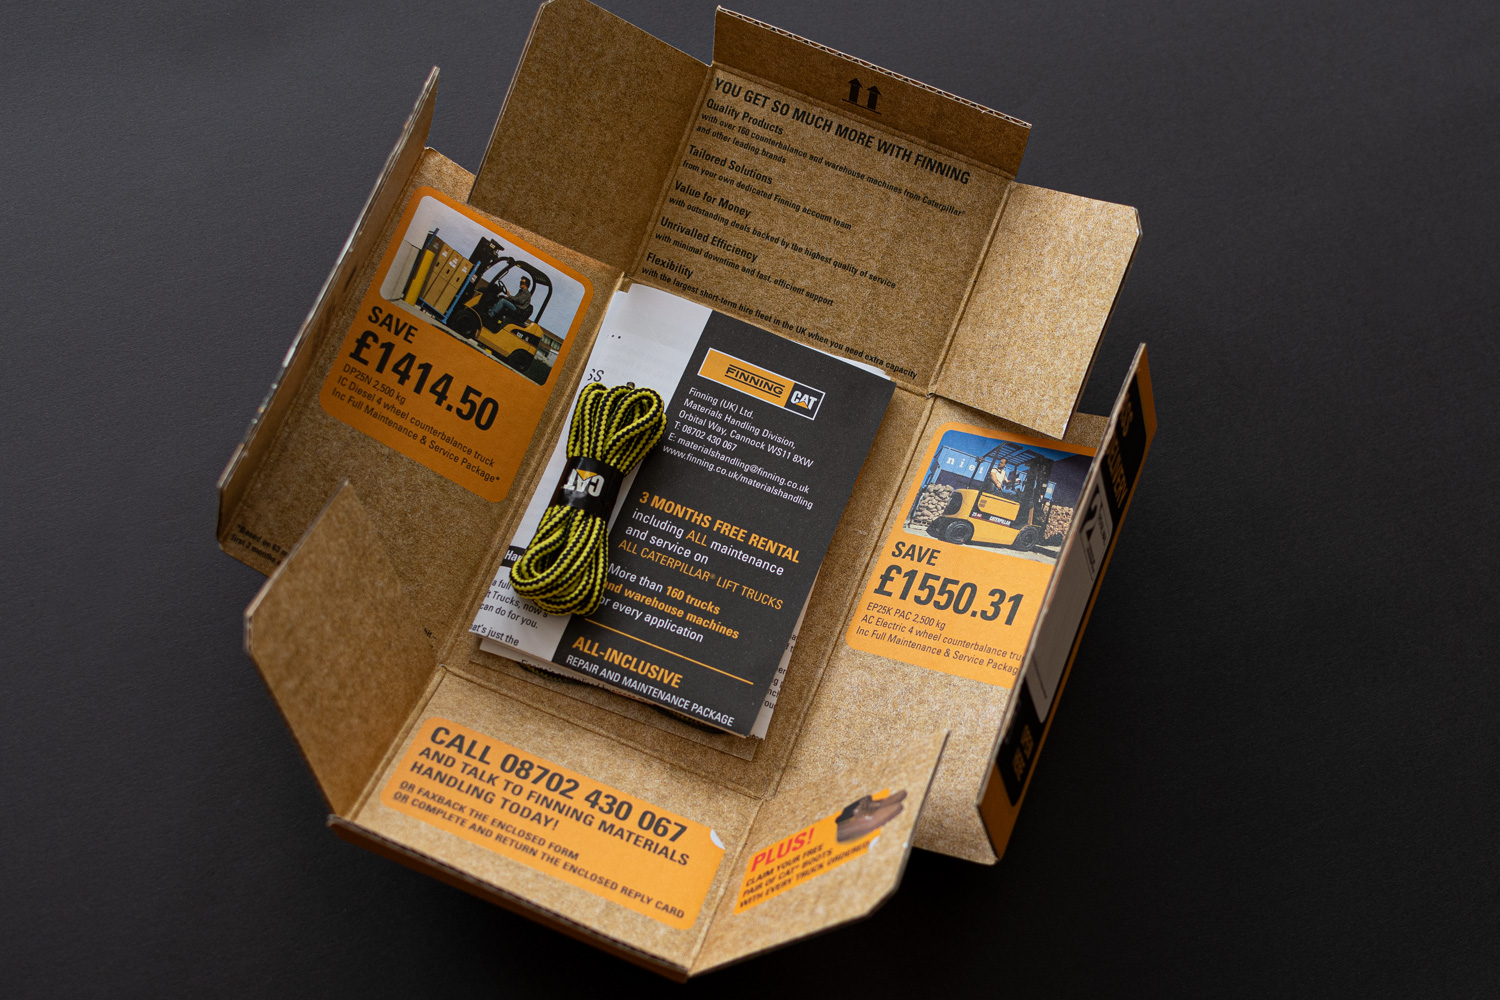 Finning CAT mailer box design with contents